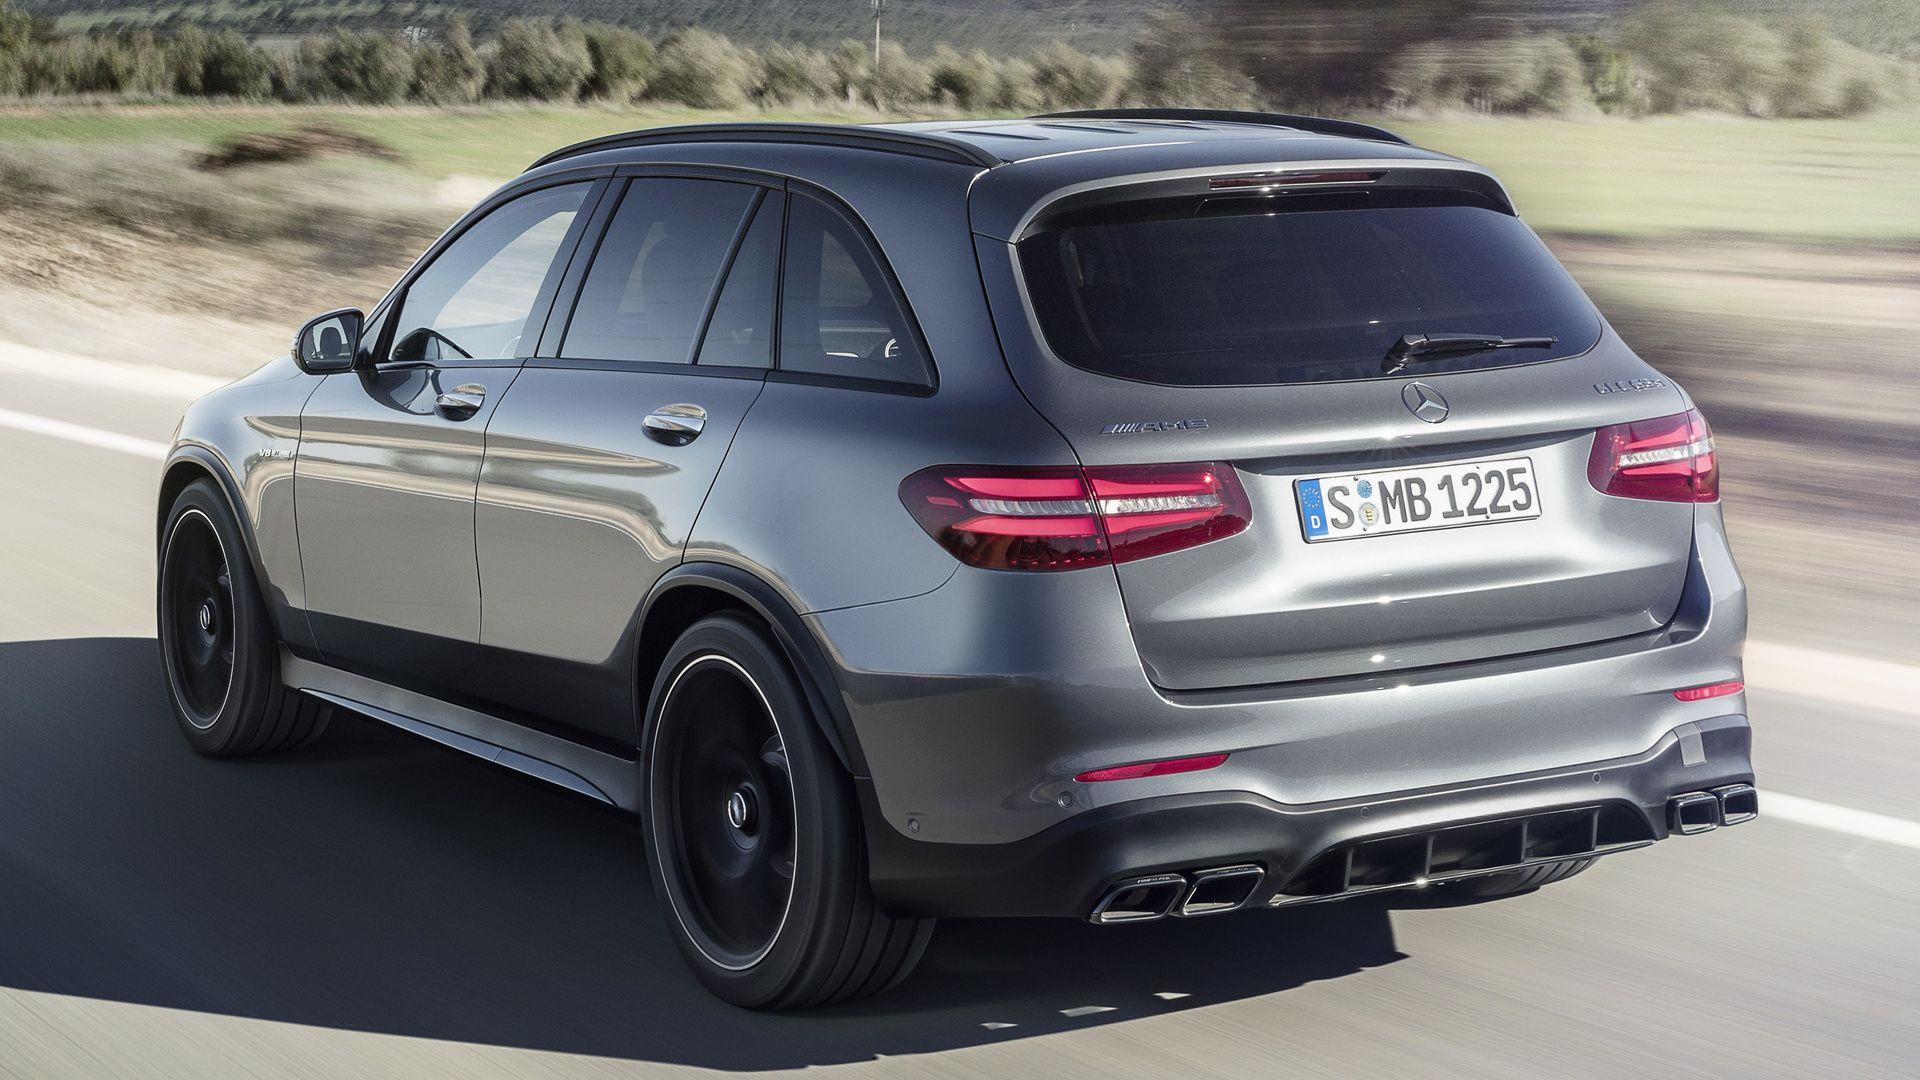 Mercedes AMG GLC 63 S (2017) Wallpaper And HD Image